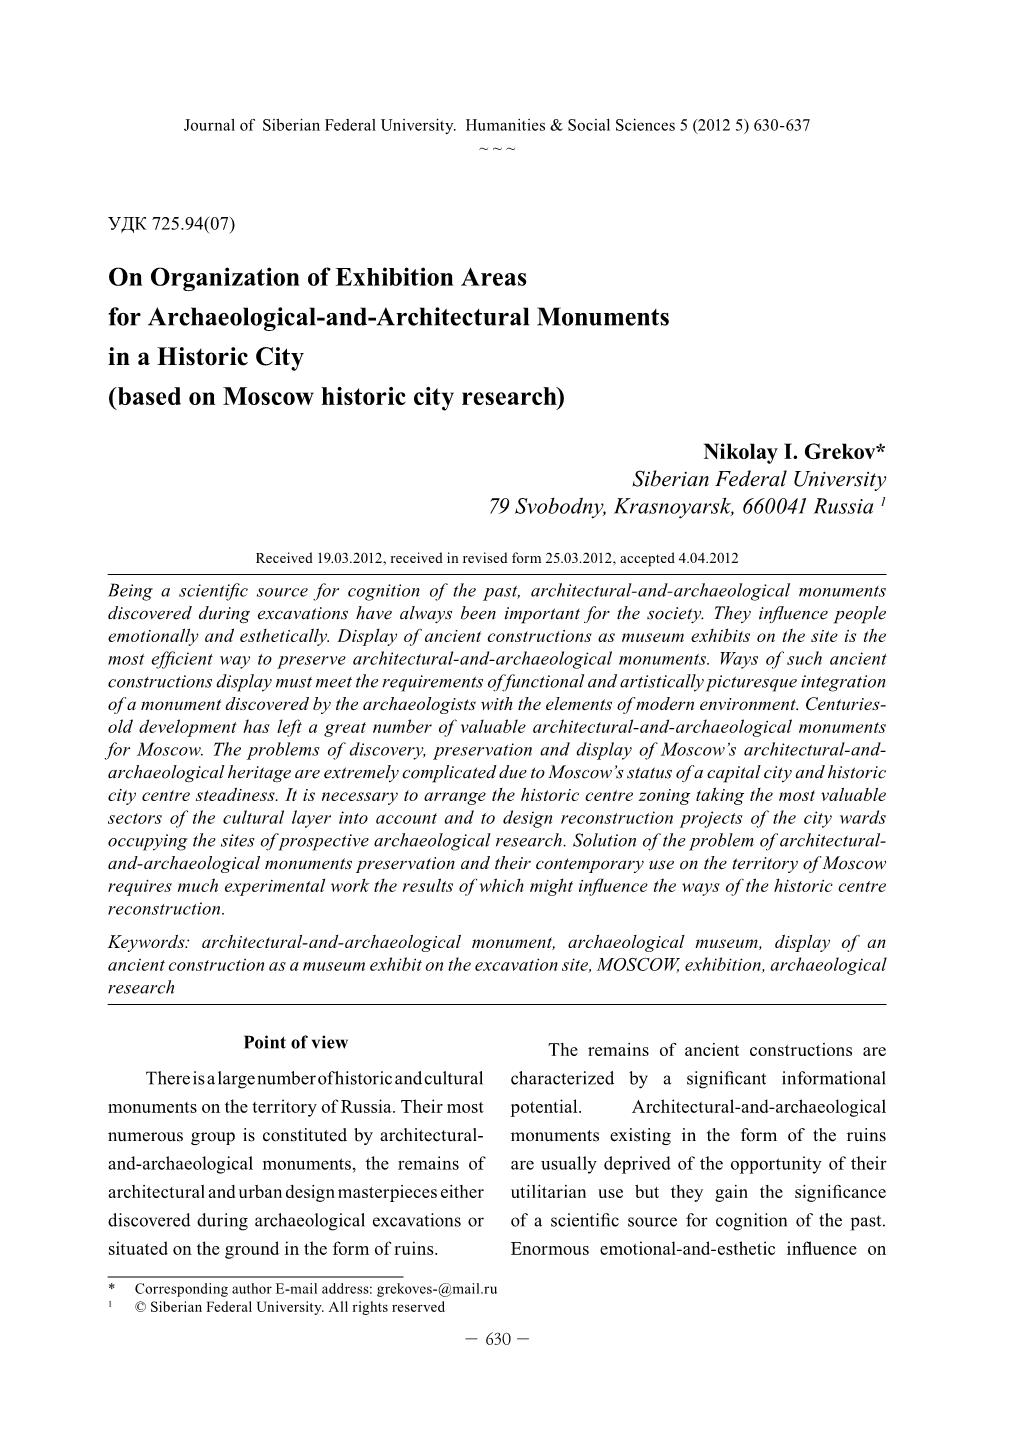 On Organization of Exhibition Areas for Archaeological-And-Architectural Monuments in a Historic City (Based on Moscow Historic City Research)